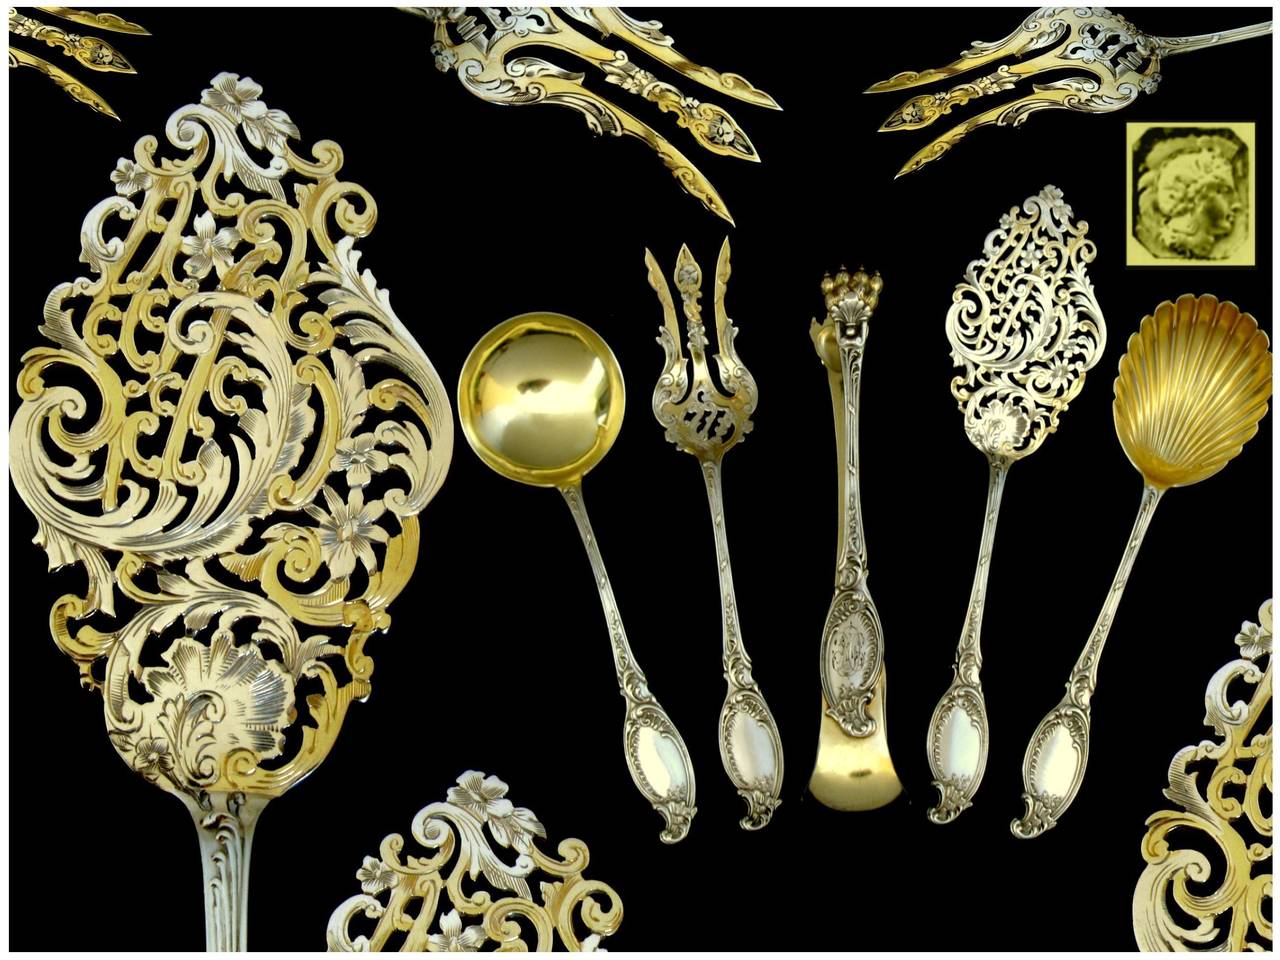 Henin Fabulous French All Sterling Silver Vermeil Dessert Set 5 pc w/box Rococo

Hallmarks :
Head of Minerve 1 st titre for 950/1000 French Sterling Silver Vermeil guarantee

A set of truly exceptional quality, for the richness of their